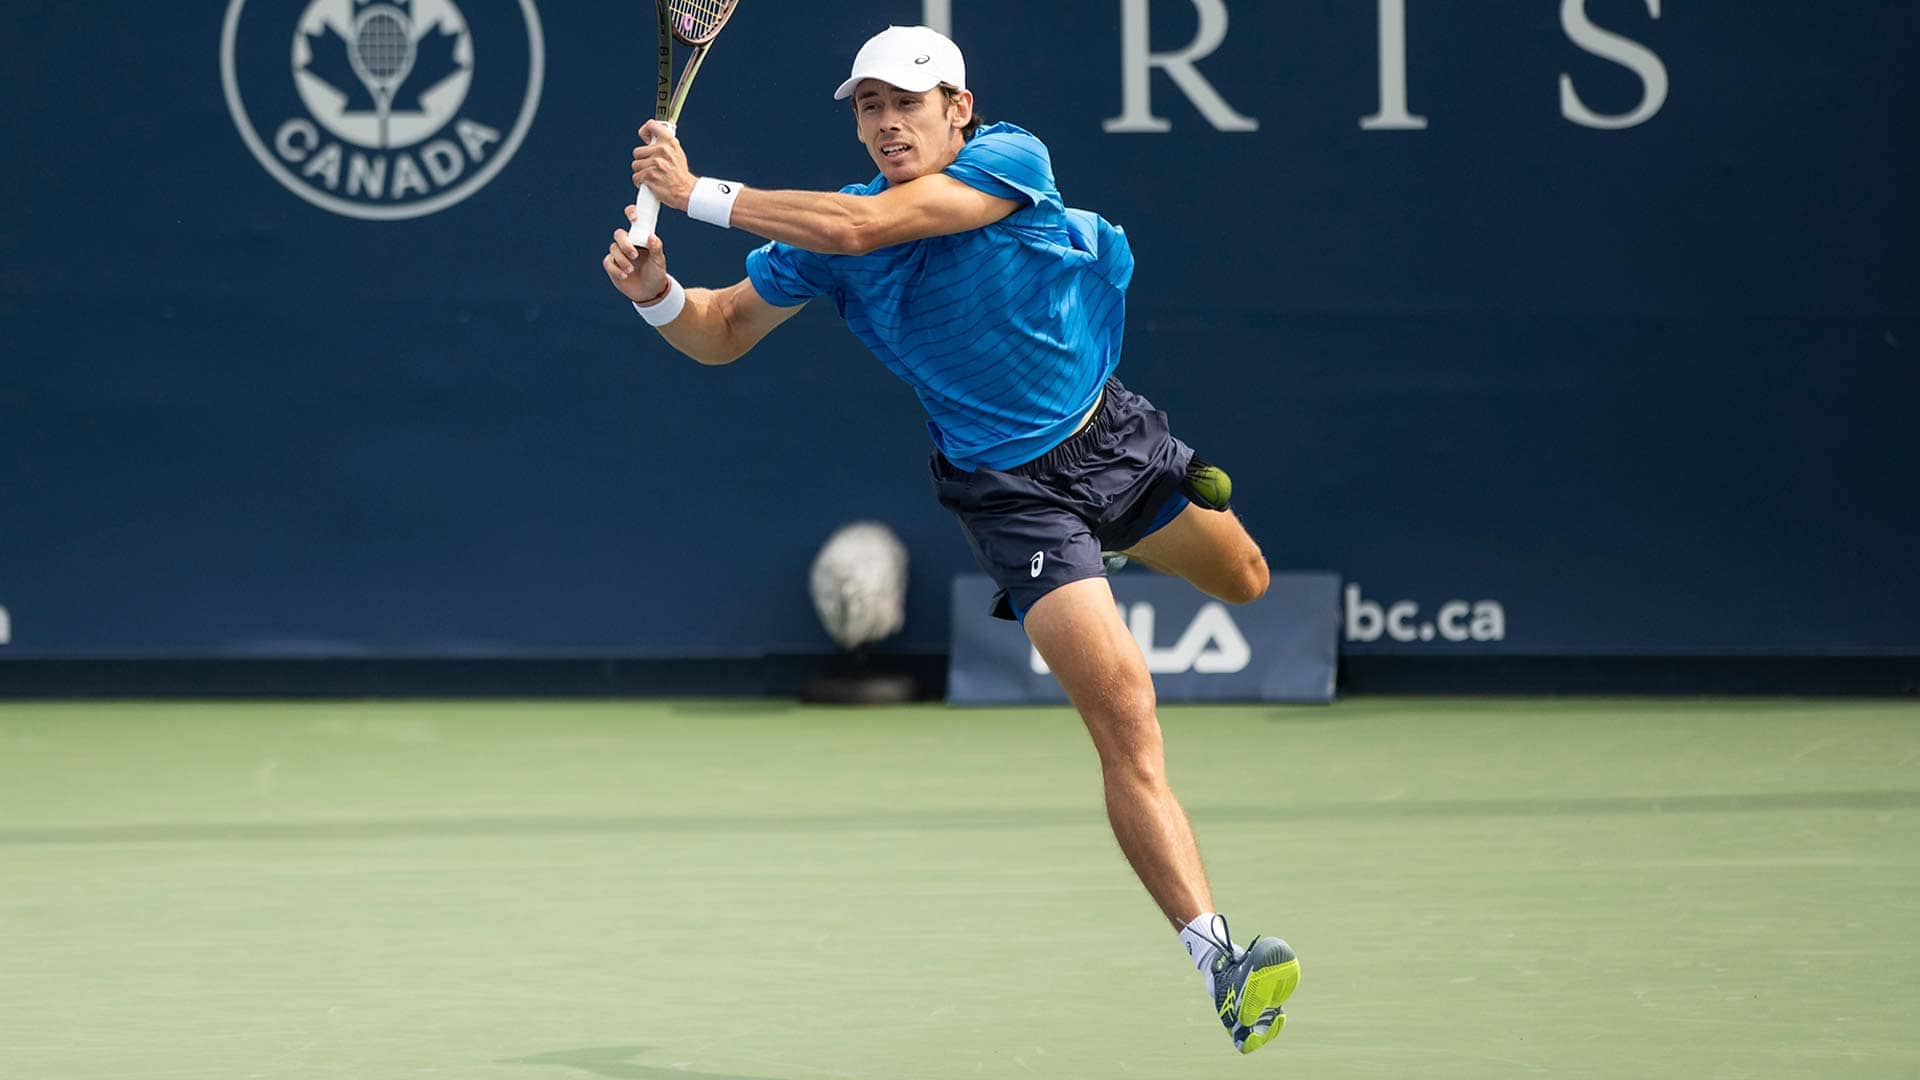 Alex de Minaur converts three of his five break points to beat Cameron Norrie on Tuesday in Toronto.